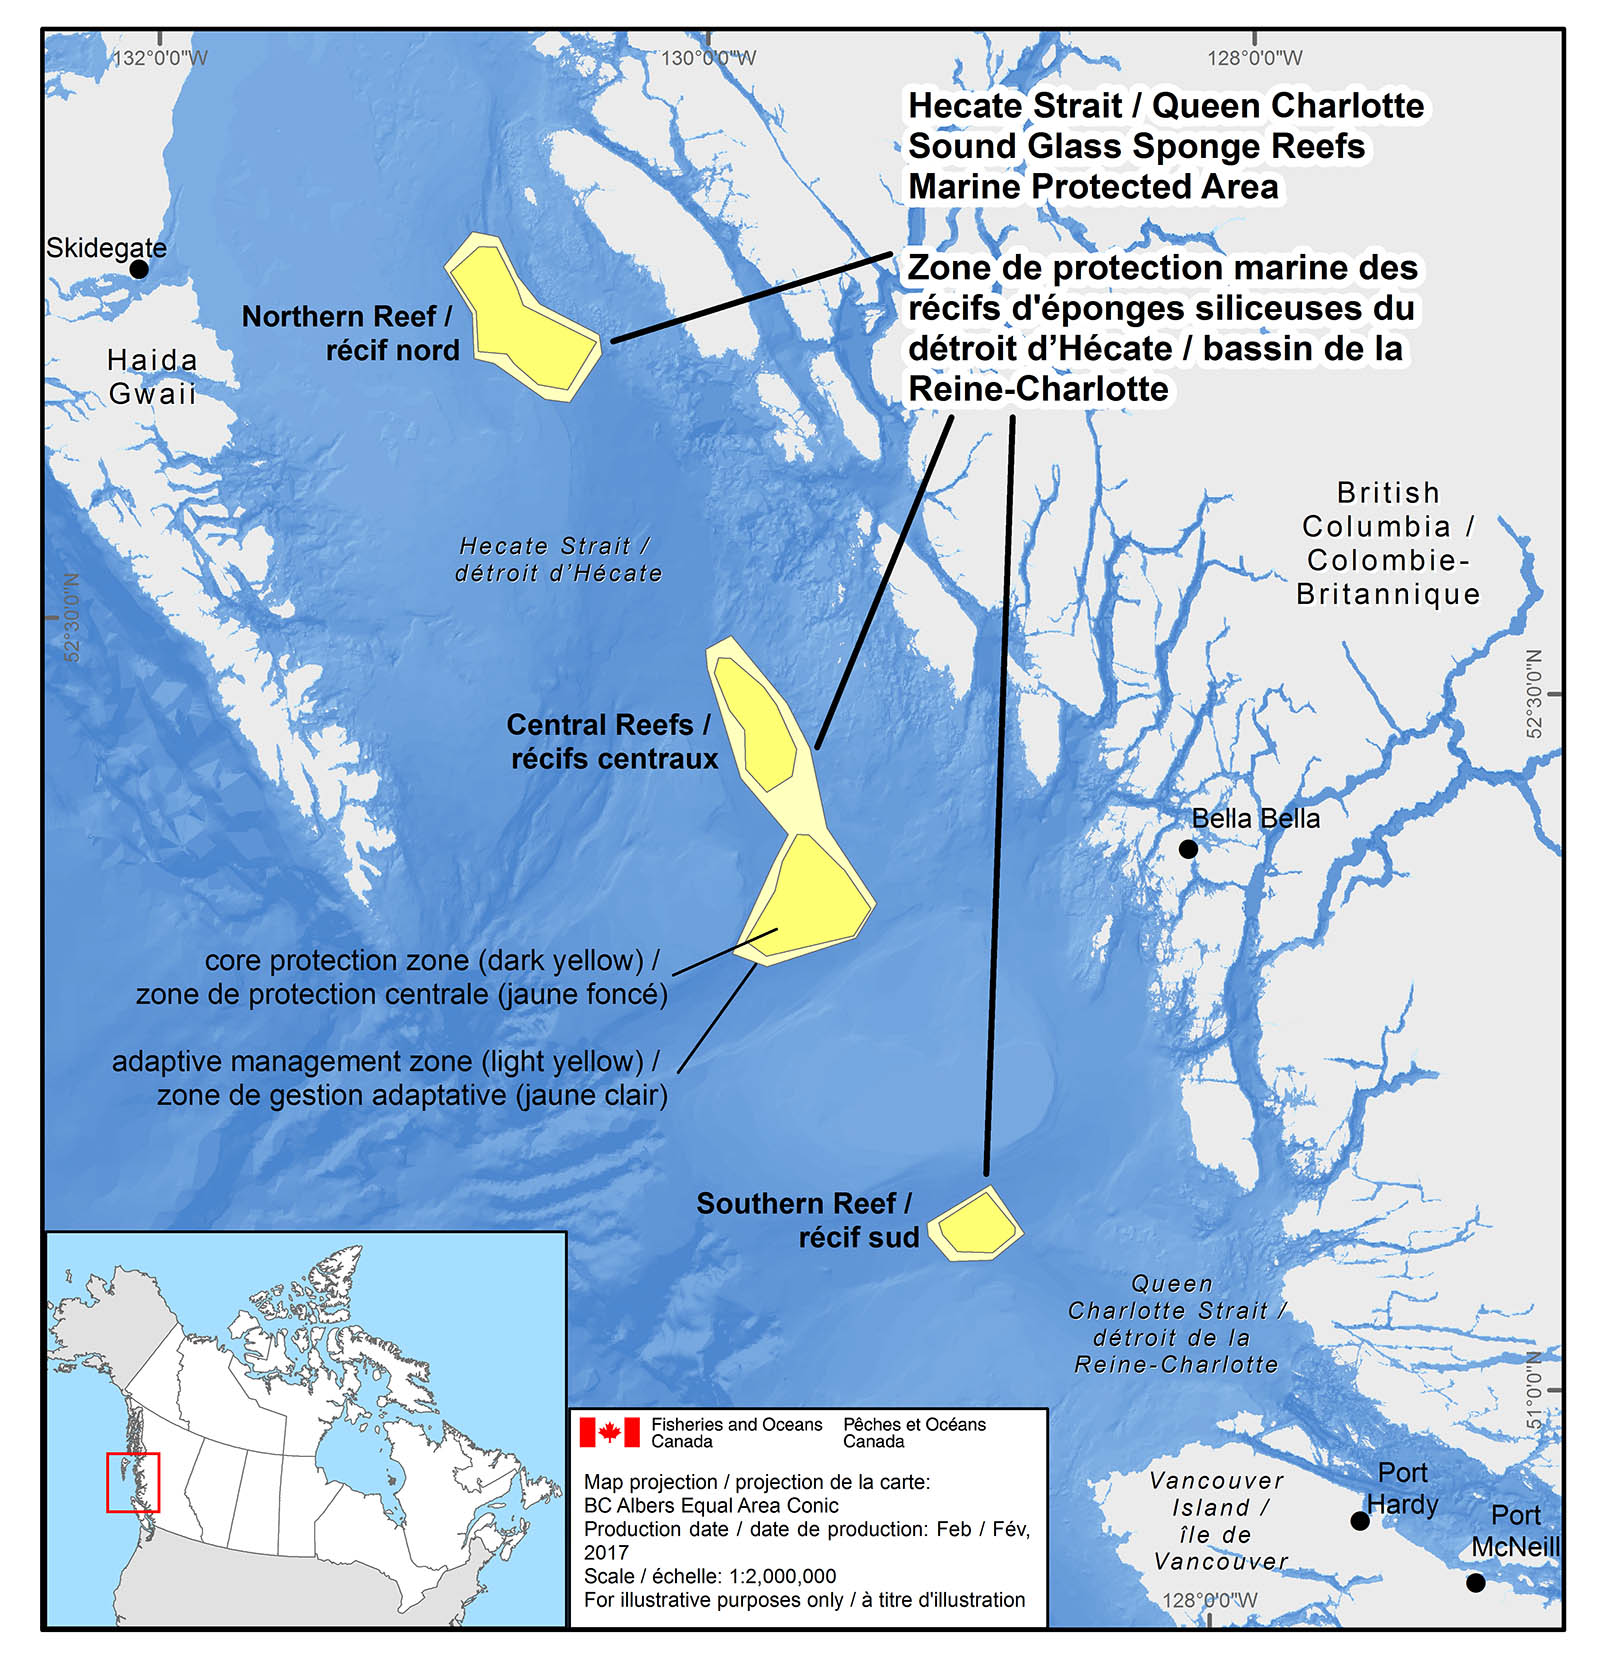 Map: Hecate Strait and Queen Charlotte Sound Glass Sponge Reefs Marine Protected Area (MPA).